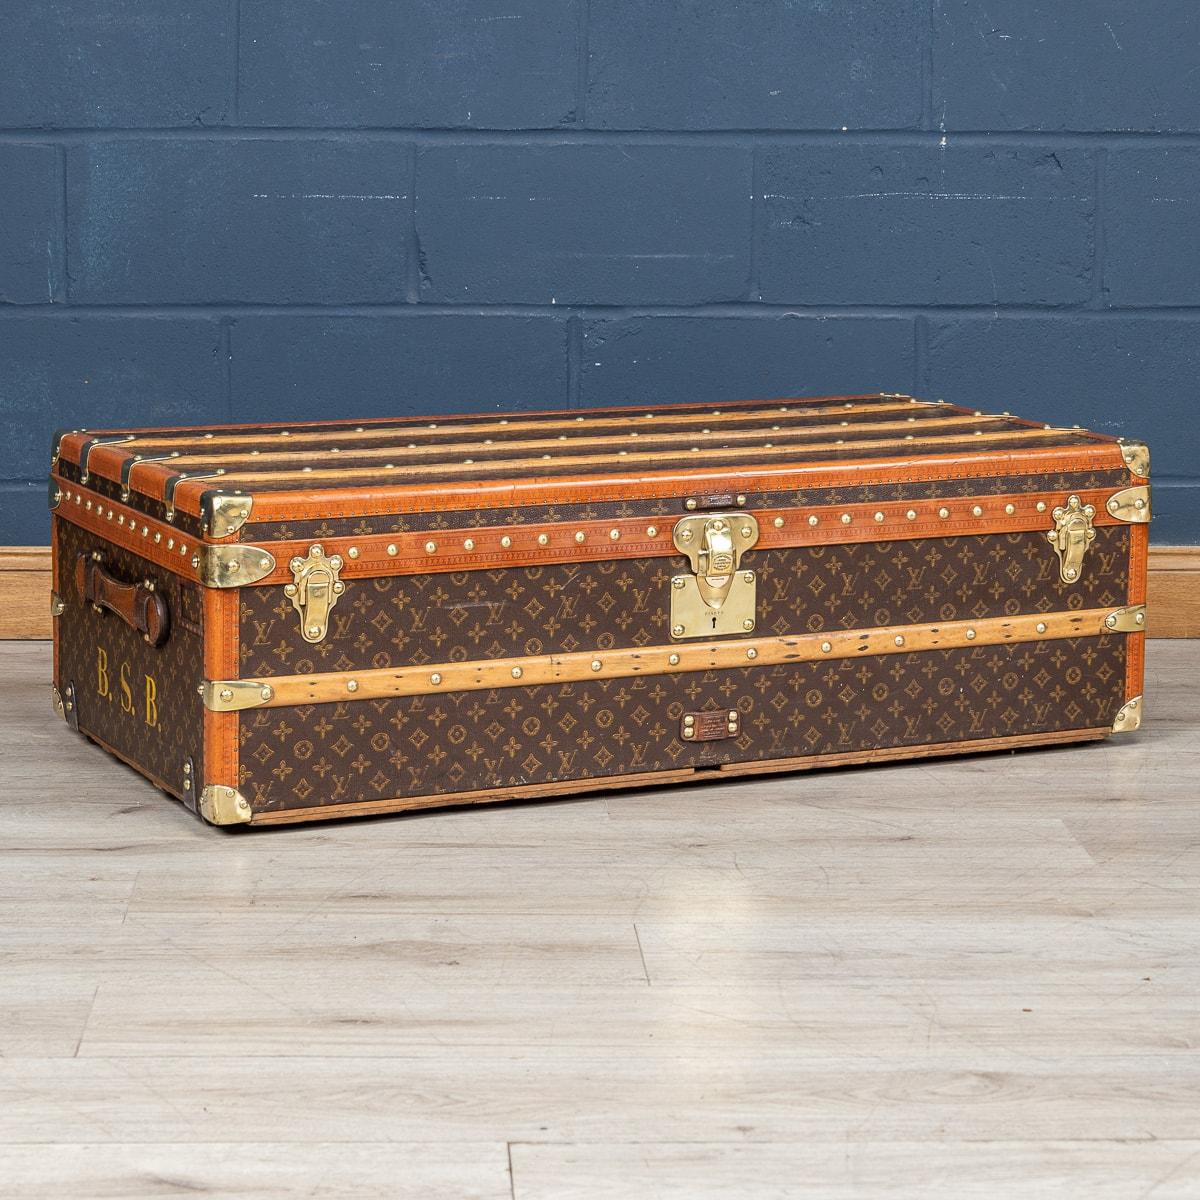 An exquisite and complete Louis Vuitton trunk from the early part of the 20th century. An absolutely essential item for elite travellers of its time the trunk is adorned in the iconic LV monogrammed canvas, accented by lozine trim and brass